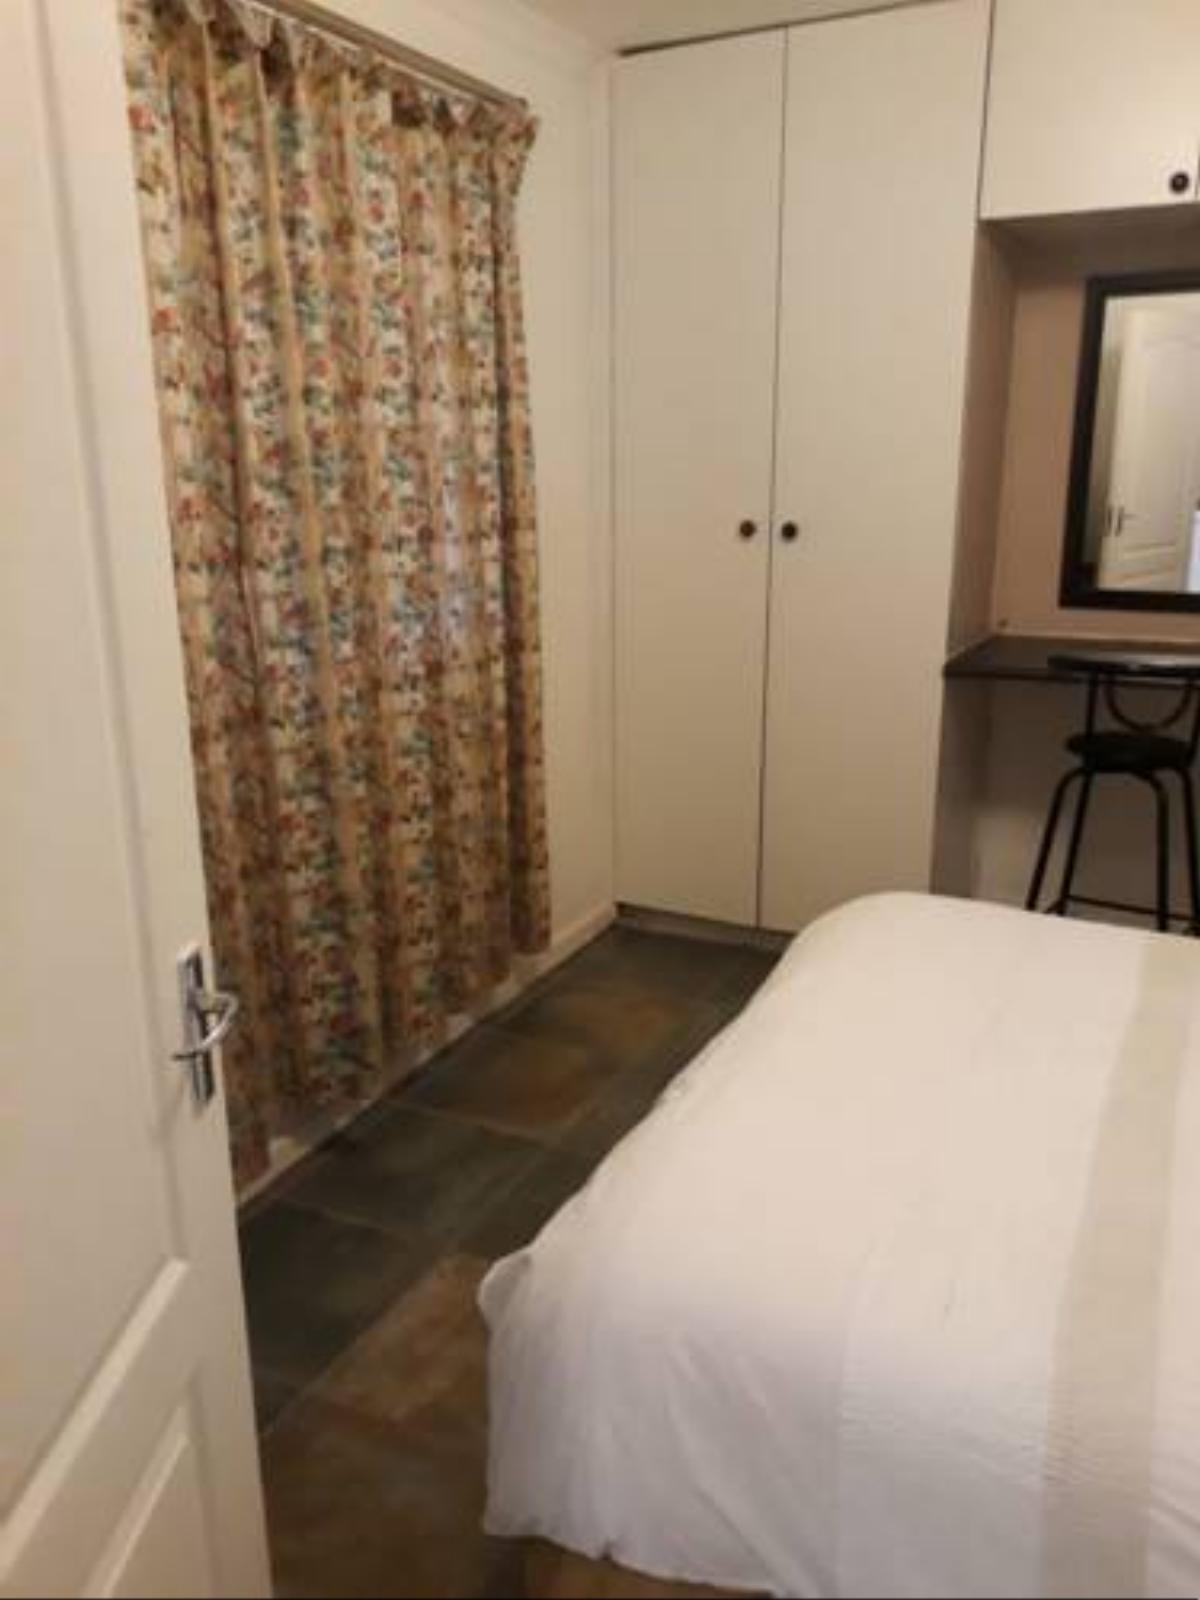 Adelaide's Guest House Hotel Germiston South Africa